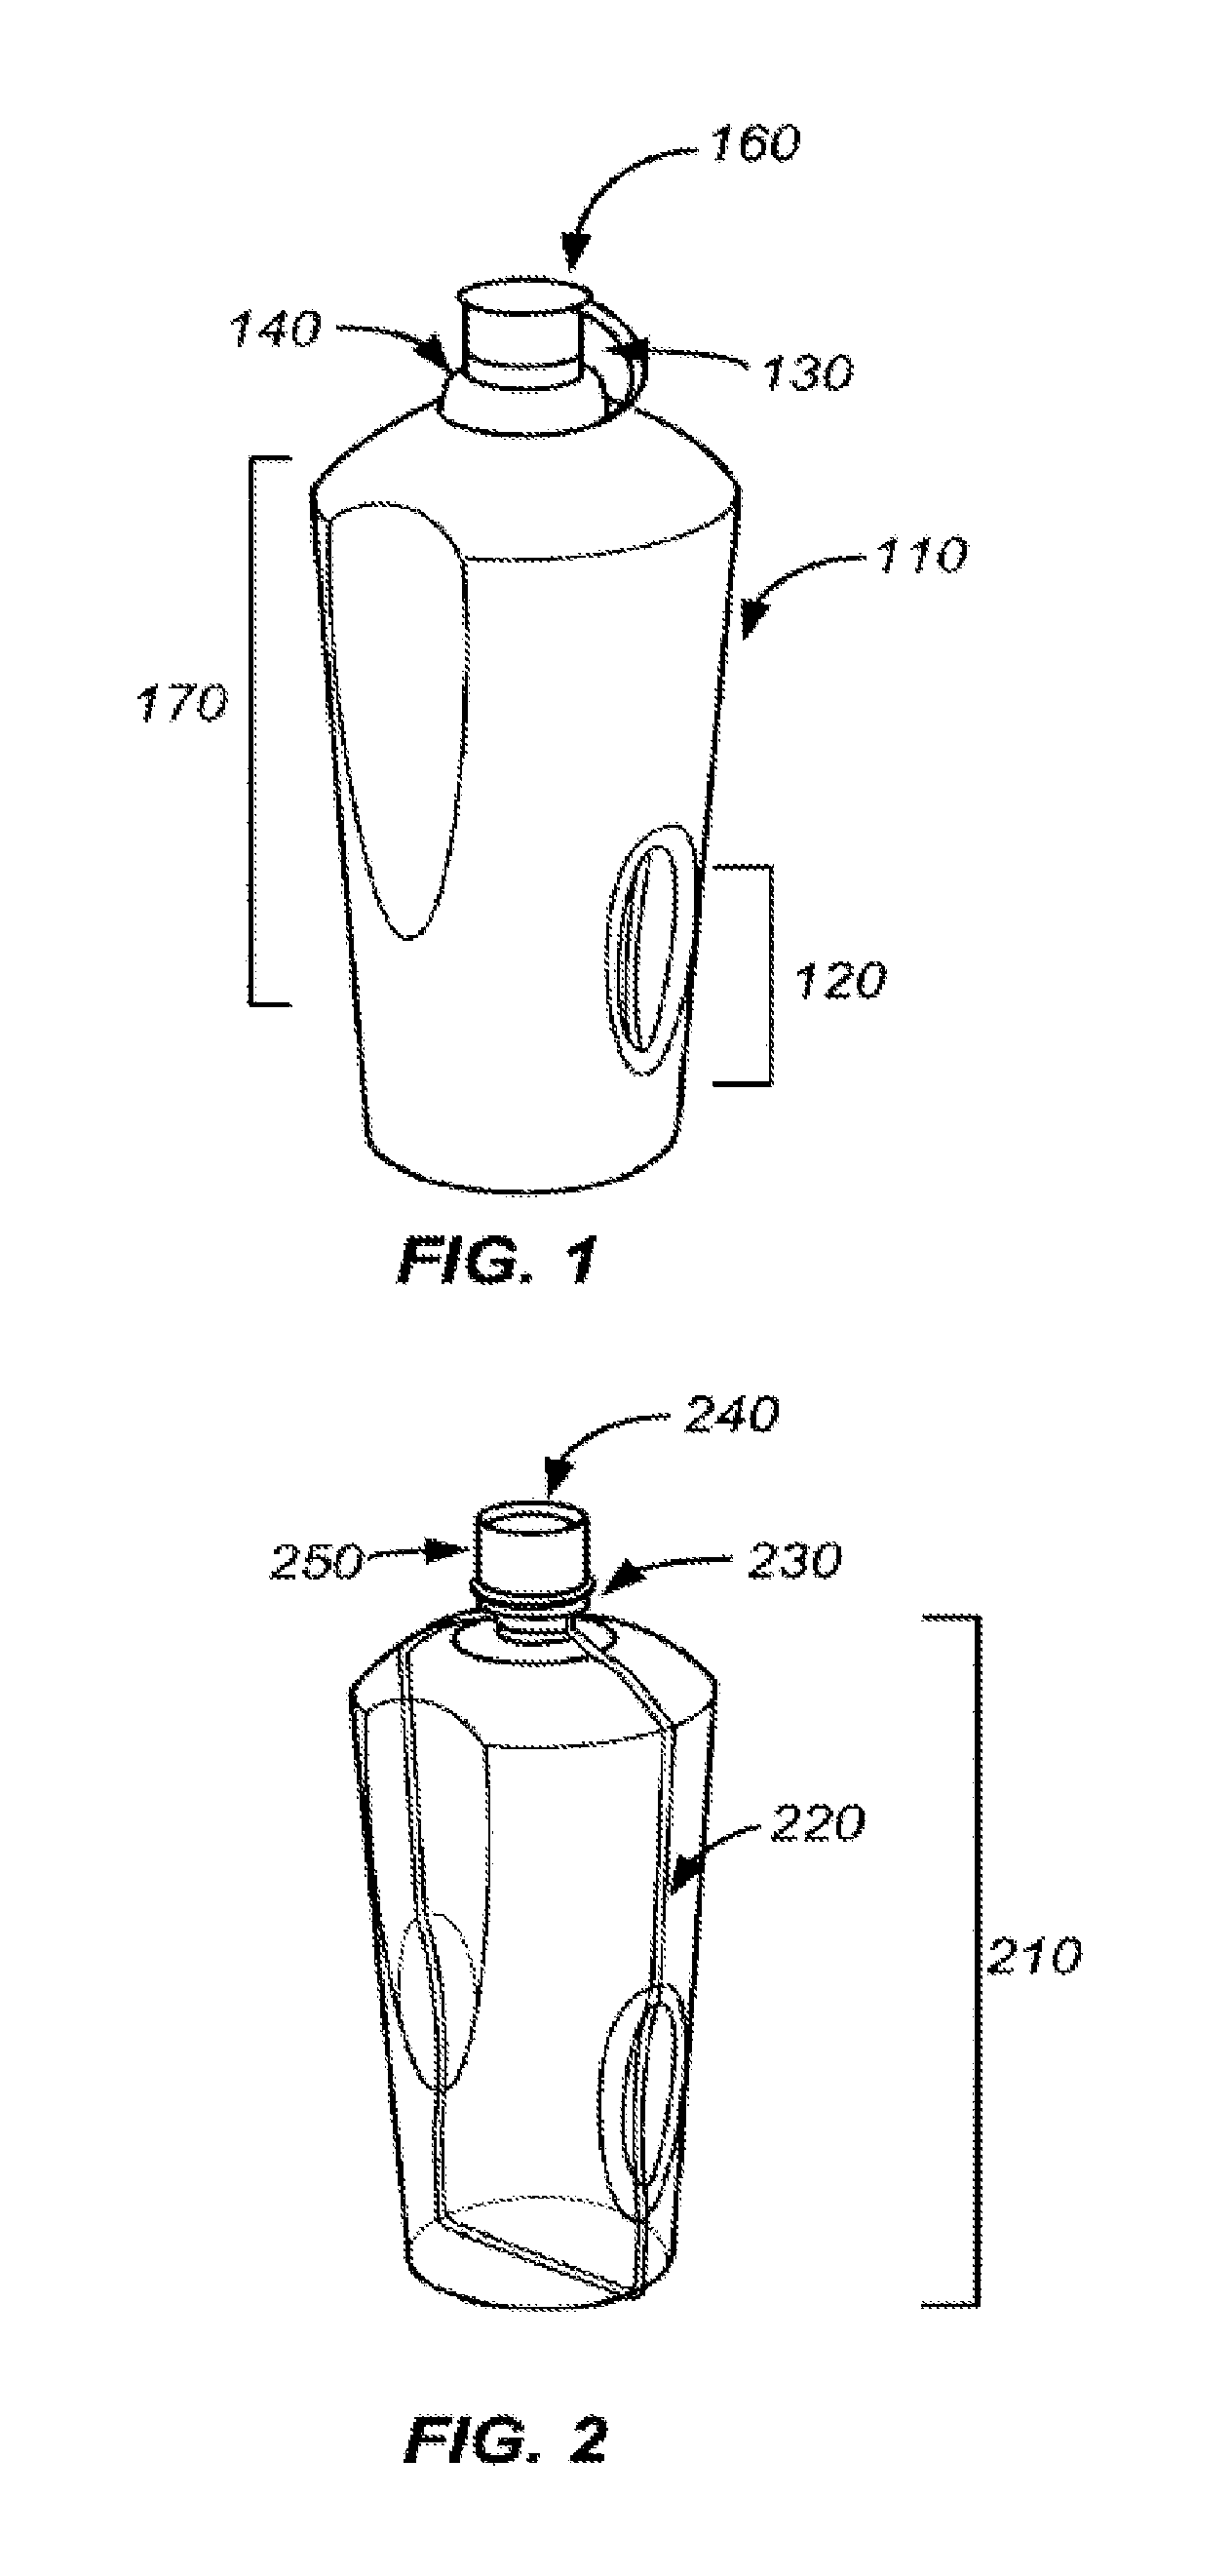 Pulp-formed wine bottle and containers for holding materials